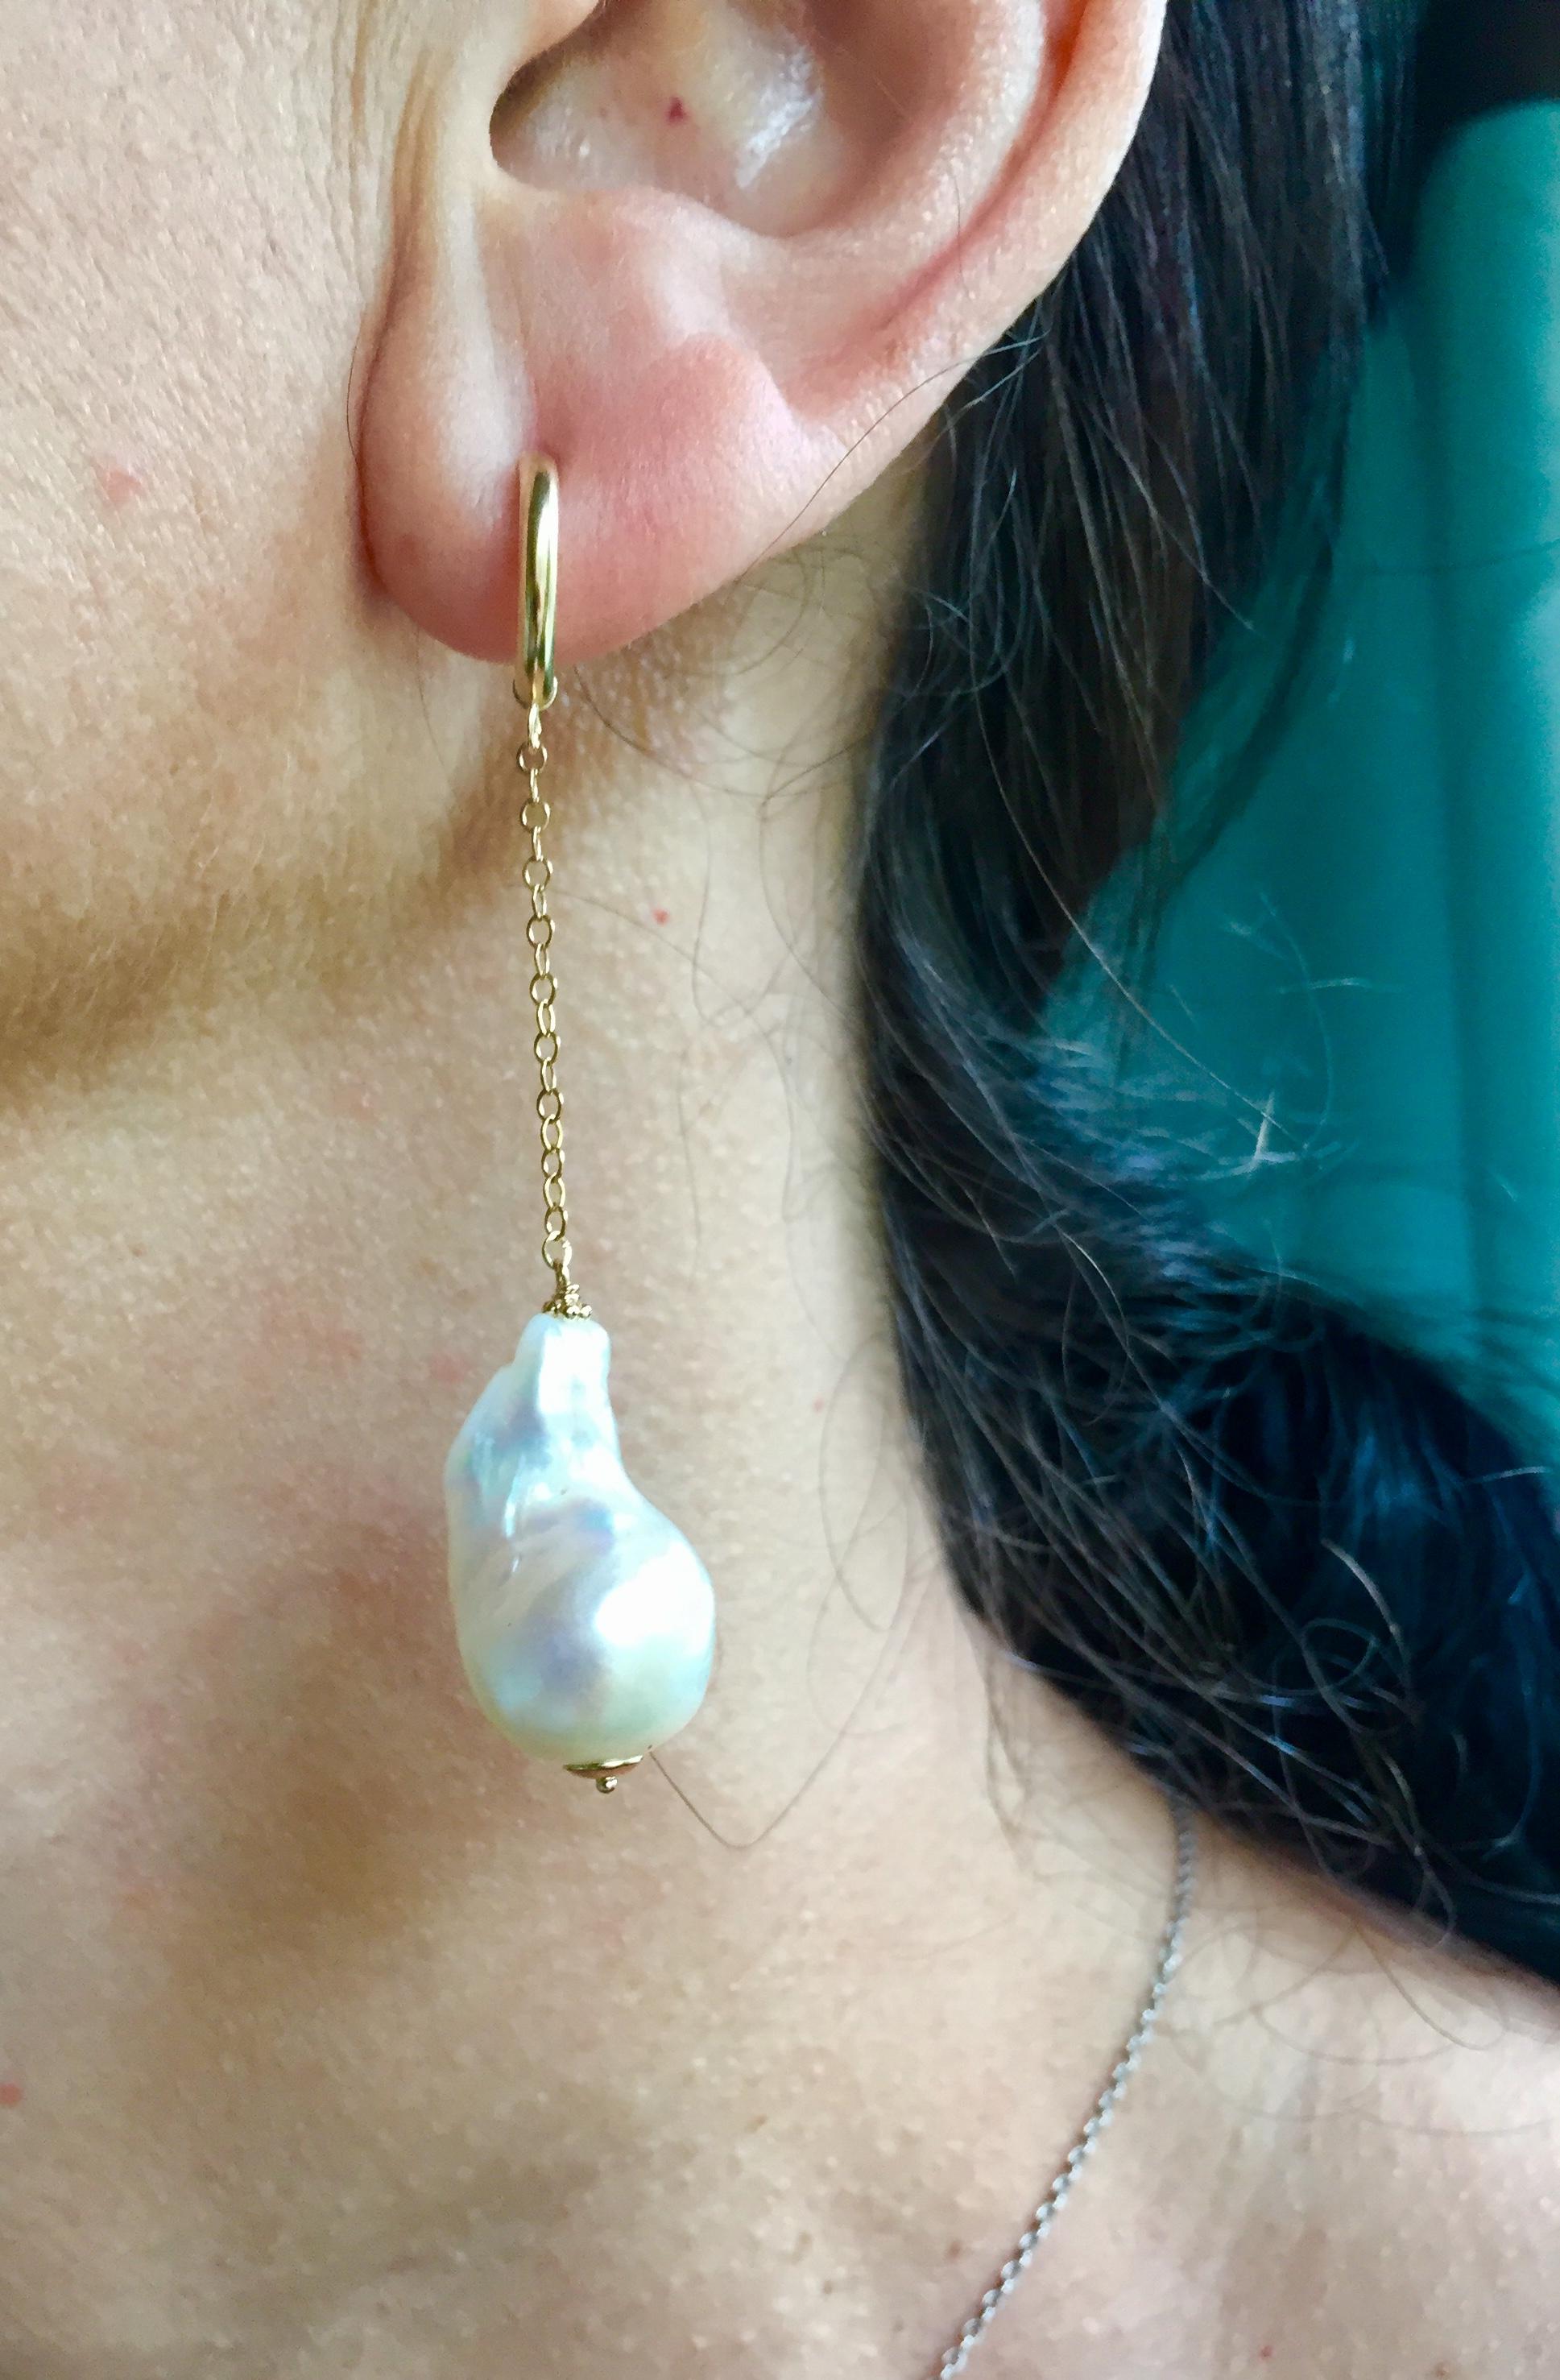 These large baroque white pearl dangle earrings with 14k yellow gold chains are stunning. The glowing white pearl is highlighted by an elegant 14k yellow gold chain and stud. These dangle earrings beautifully frame the face at 2.5 inches. The